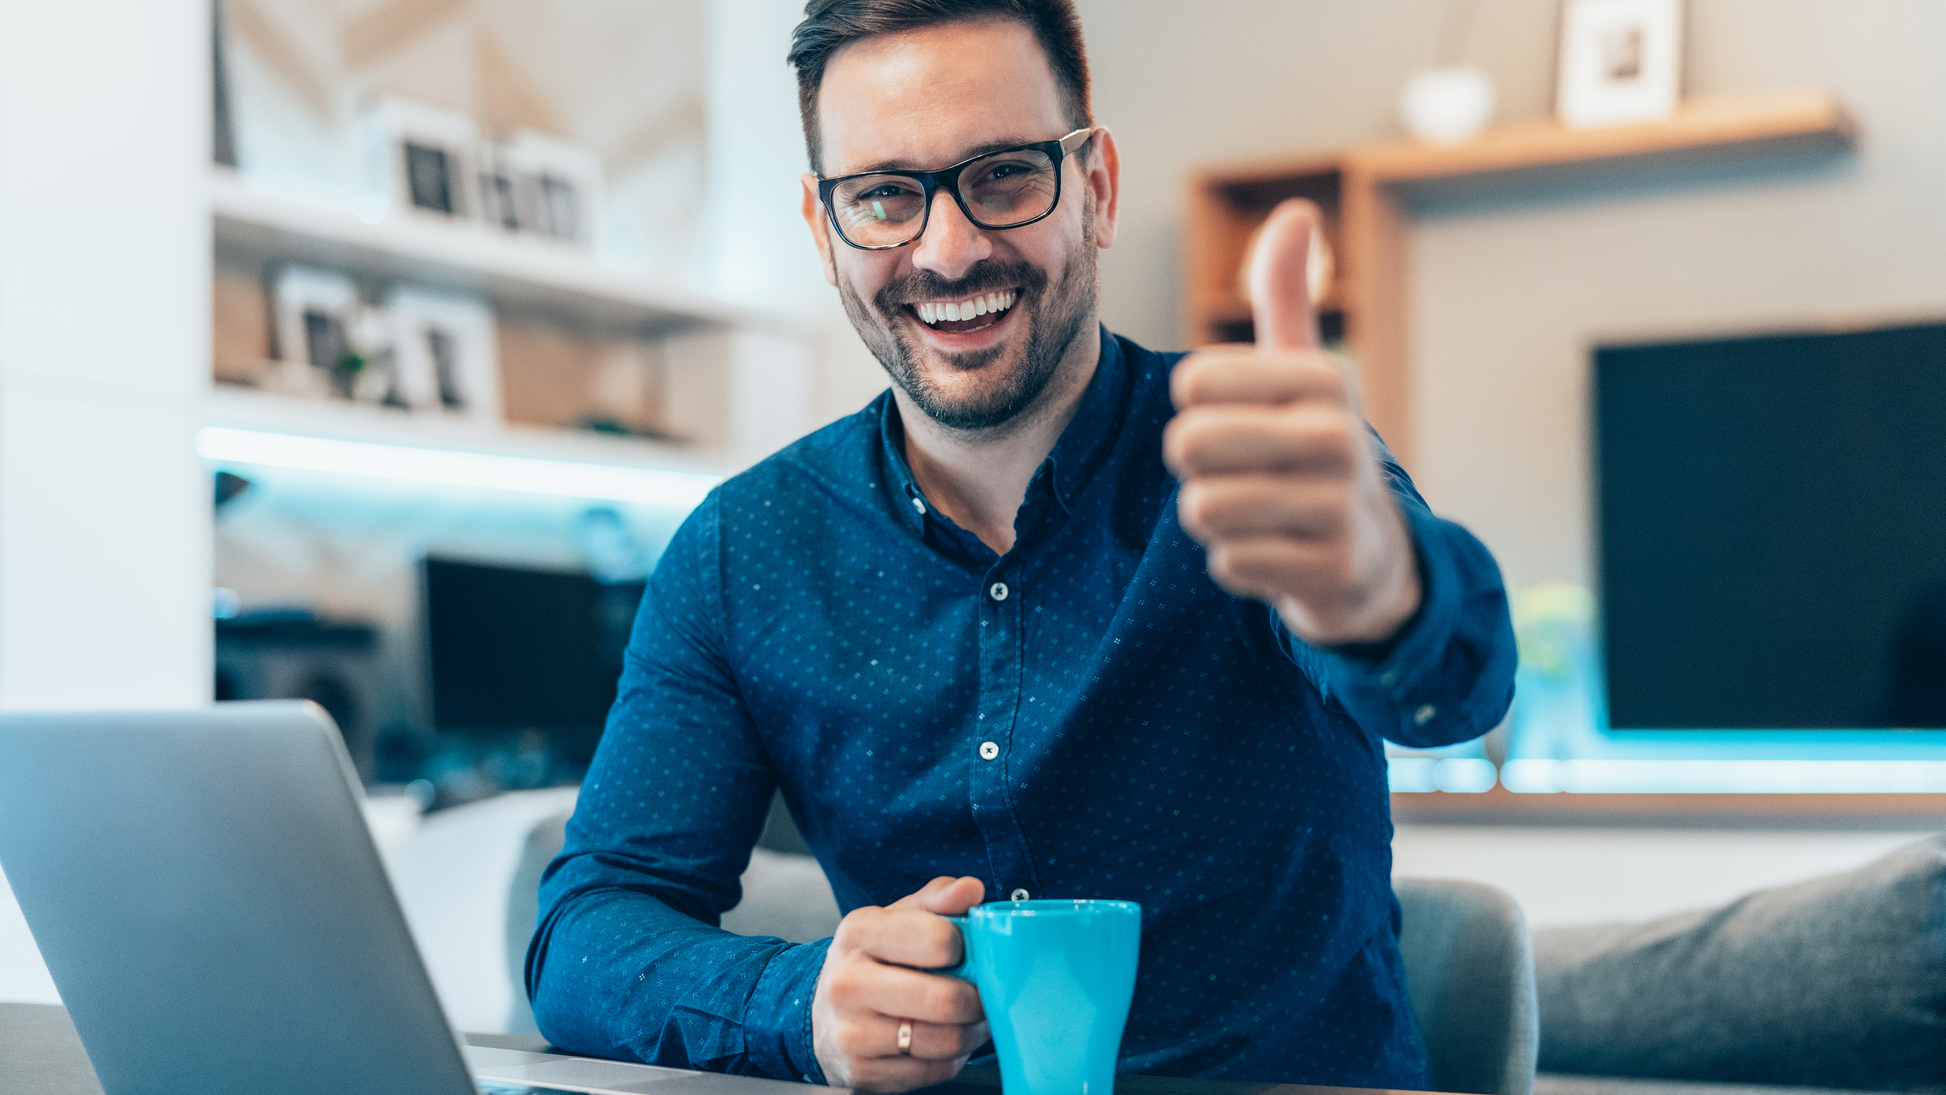 an image of smiling male, holding a cup of coffee, wearing reading glasses and guy showing thumbs up in front of a laptop